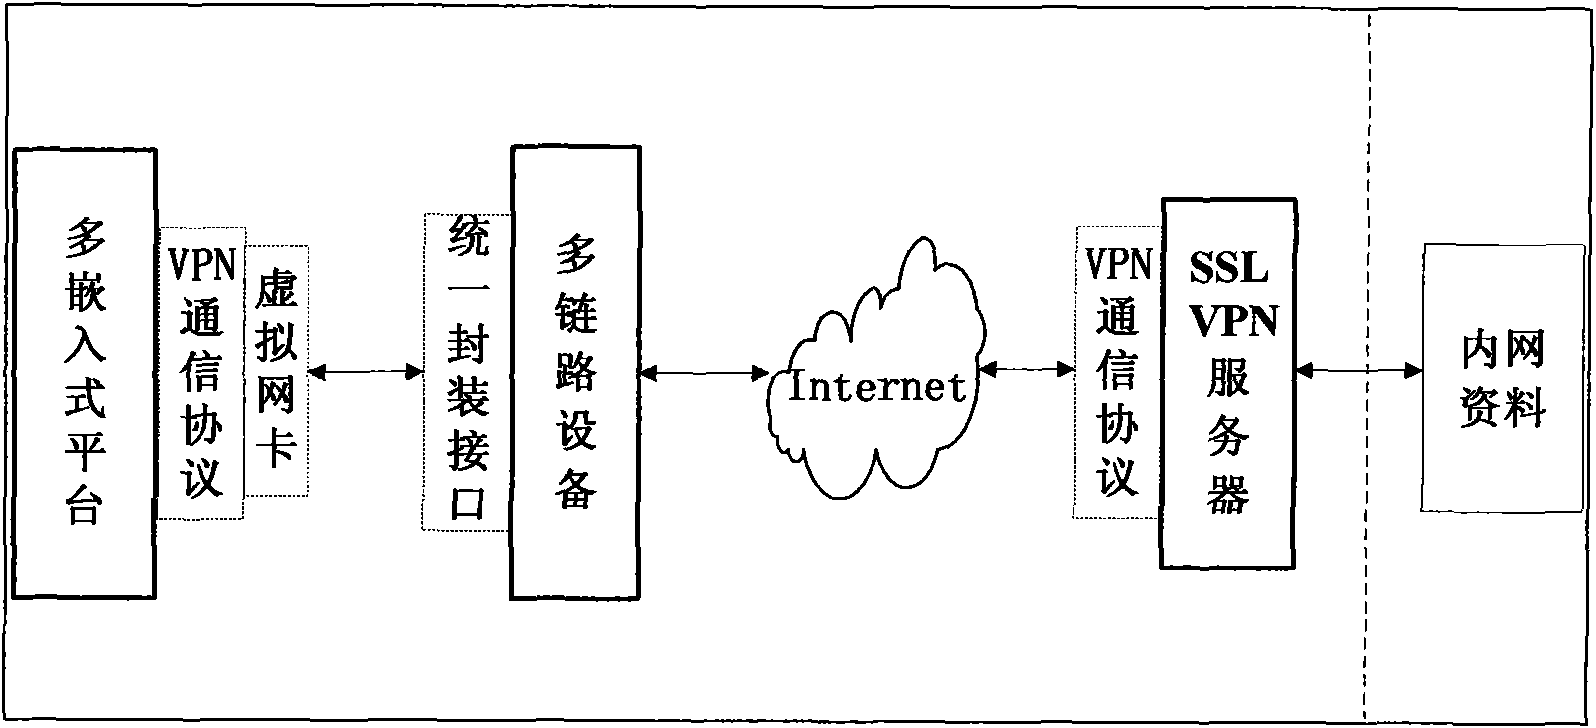 Method for realizing embedded secure socket layer virtual private network (SSL VPN)